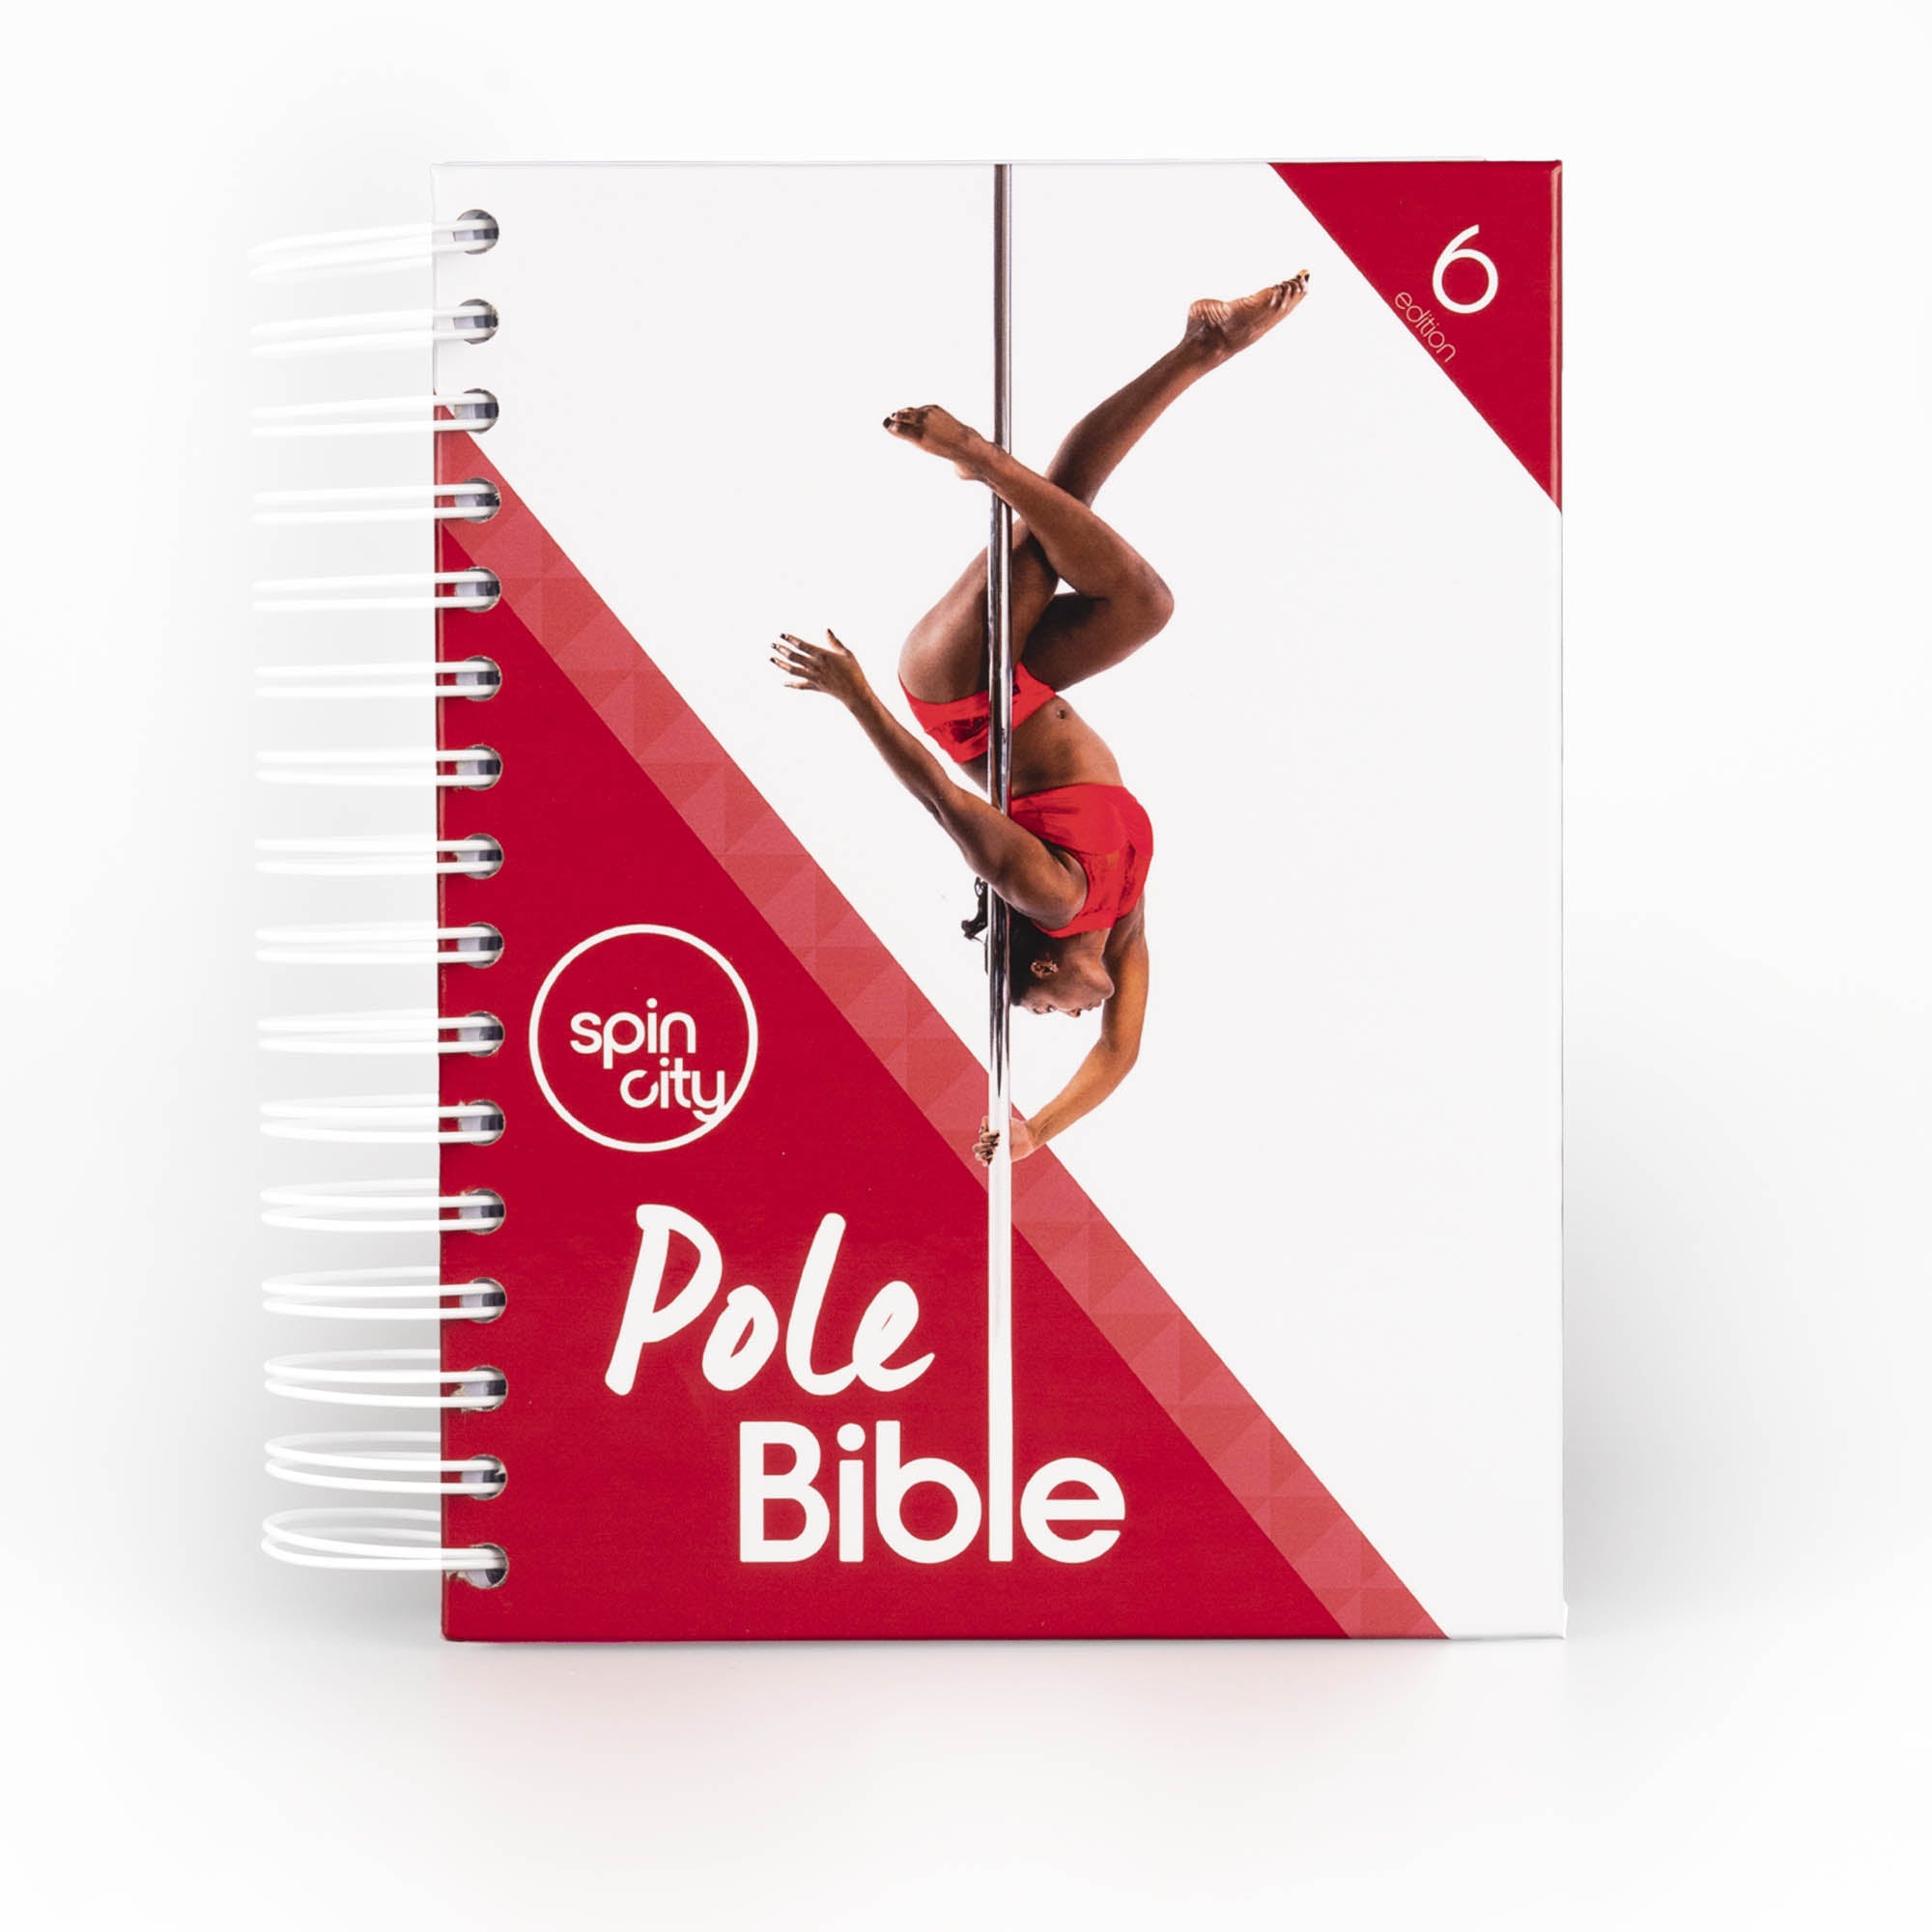 Pole bible edition 6 front on in a white background